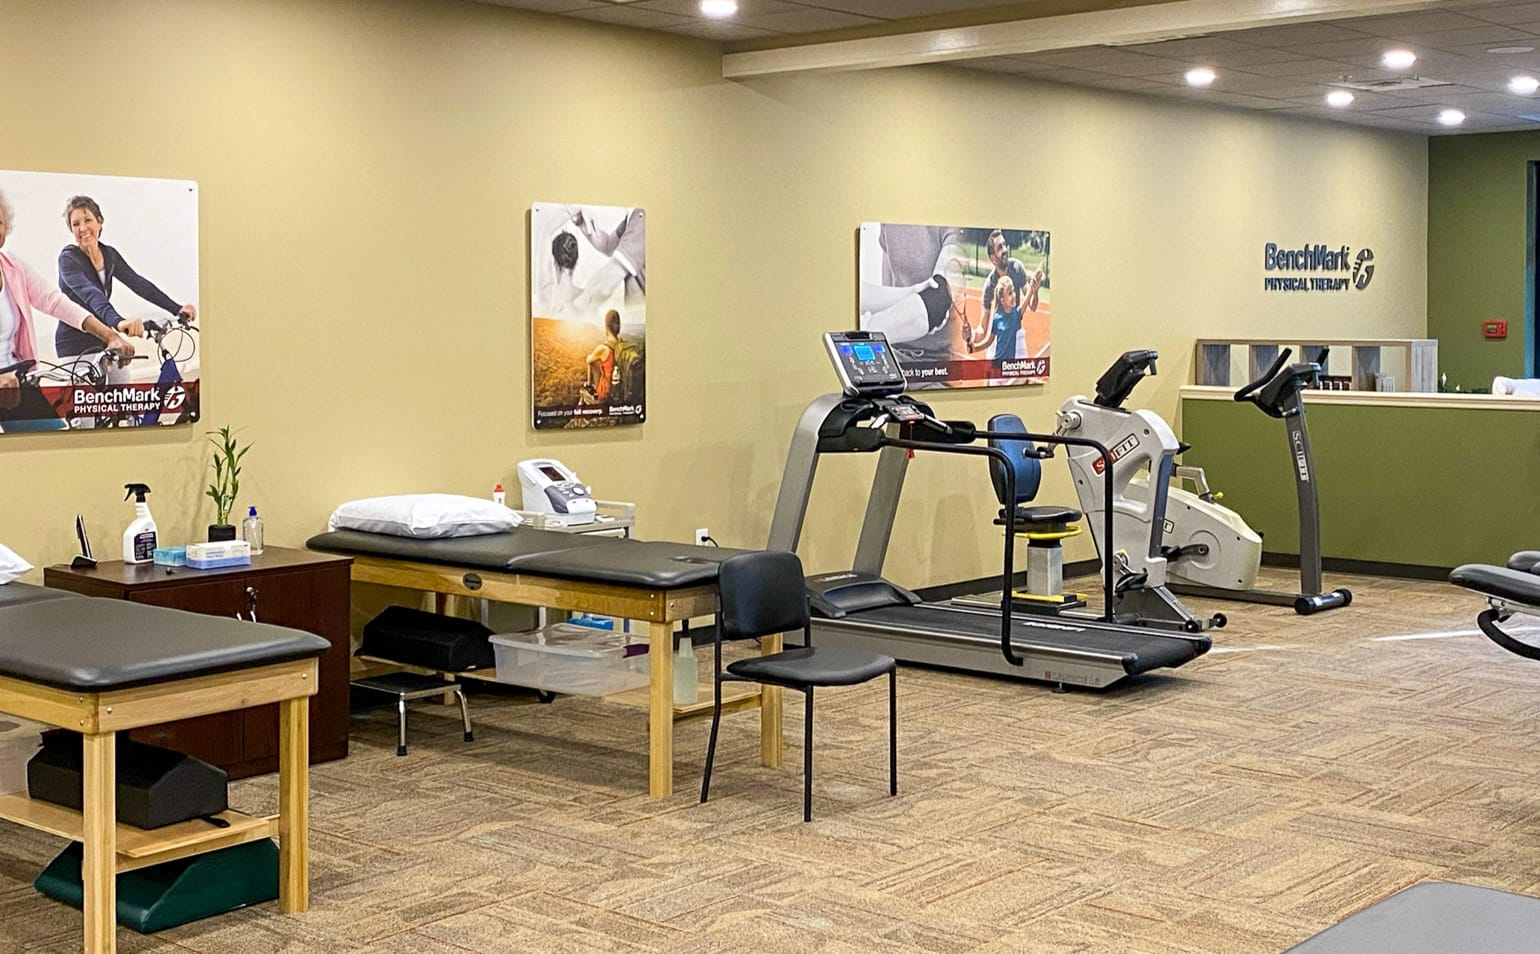 Physical Therapy in Atlanta Sandy Springs BenchMark Physical Therapy